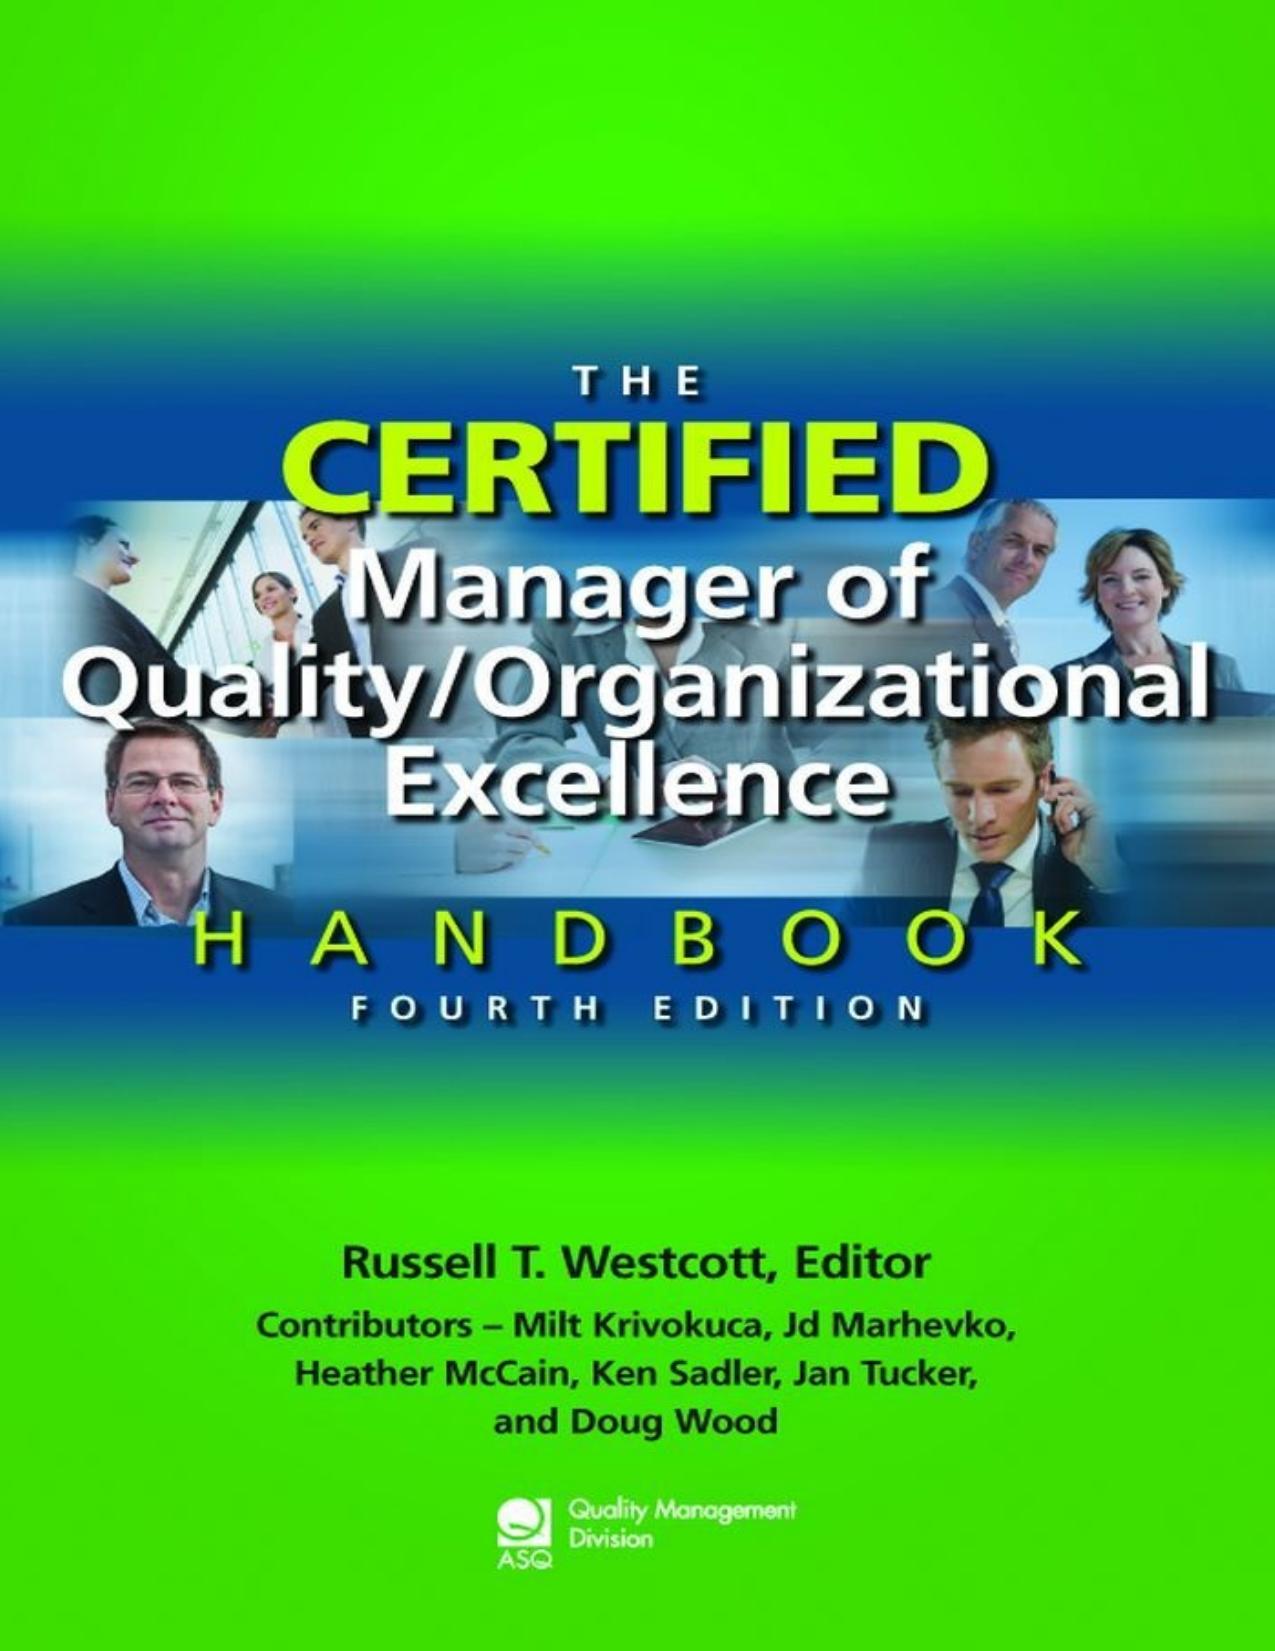 Certified Manager of Quality_Organizational Excellence Handbook, Fourth Edition, The.jpg